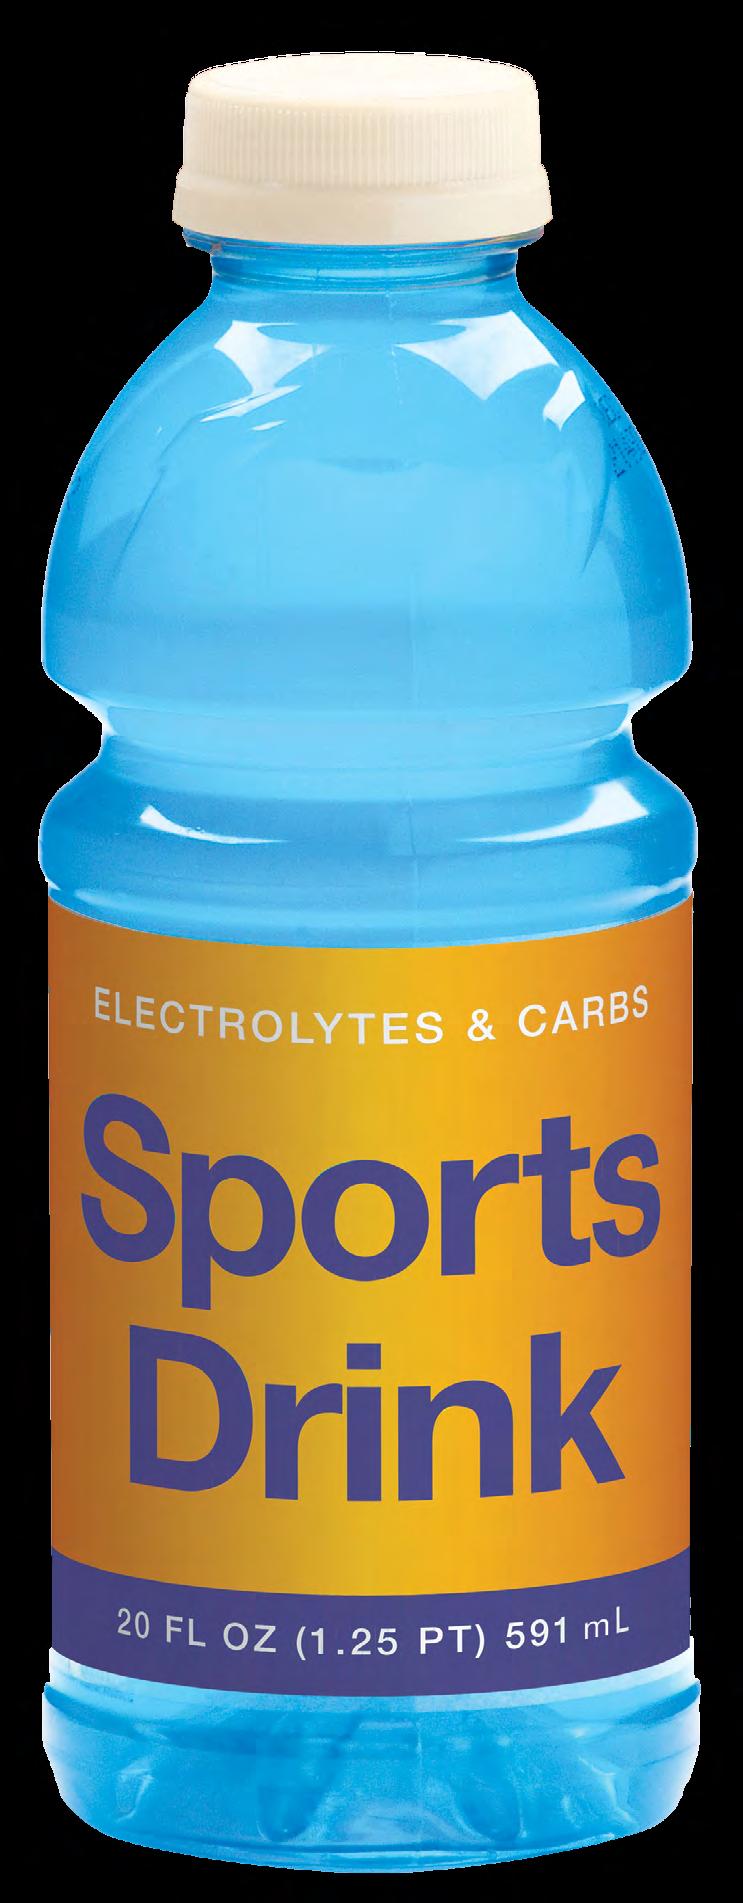 Sports Drink Servings Per Container 2.